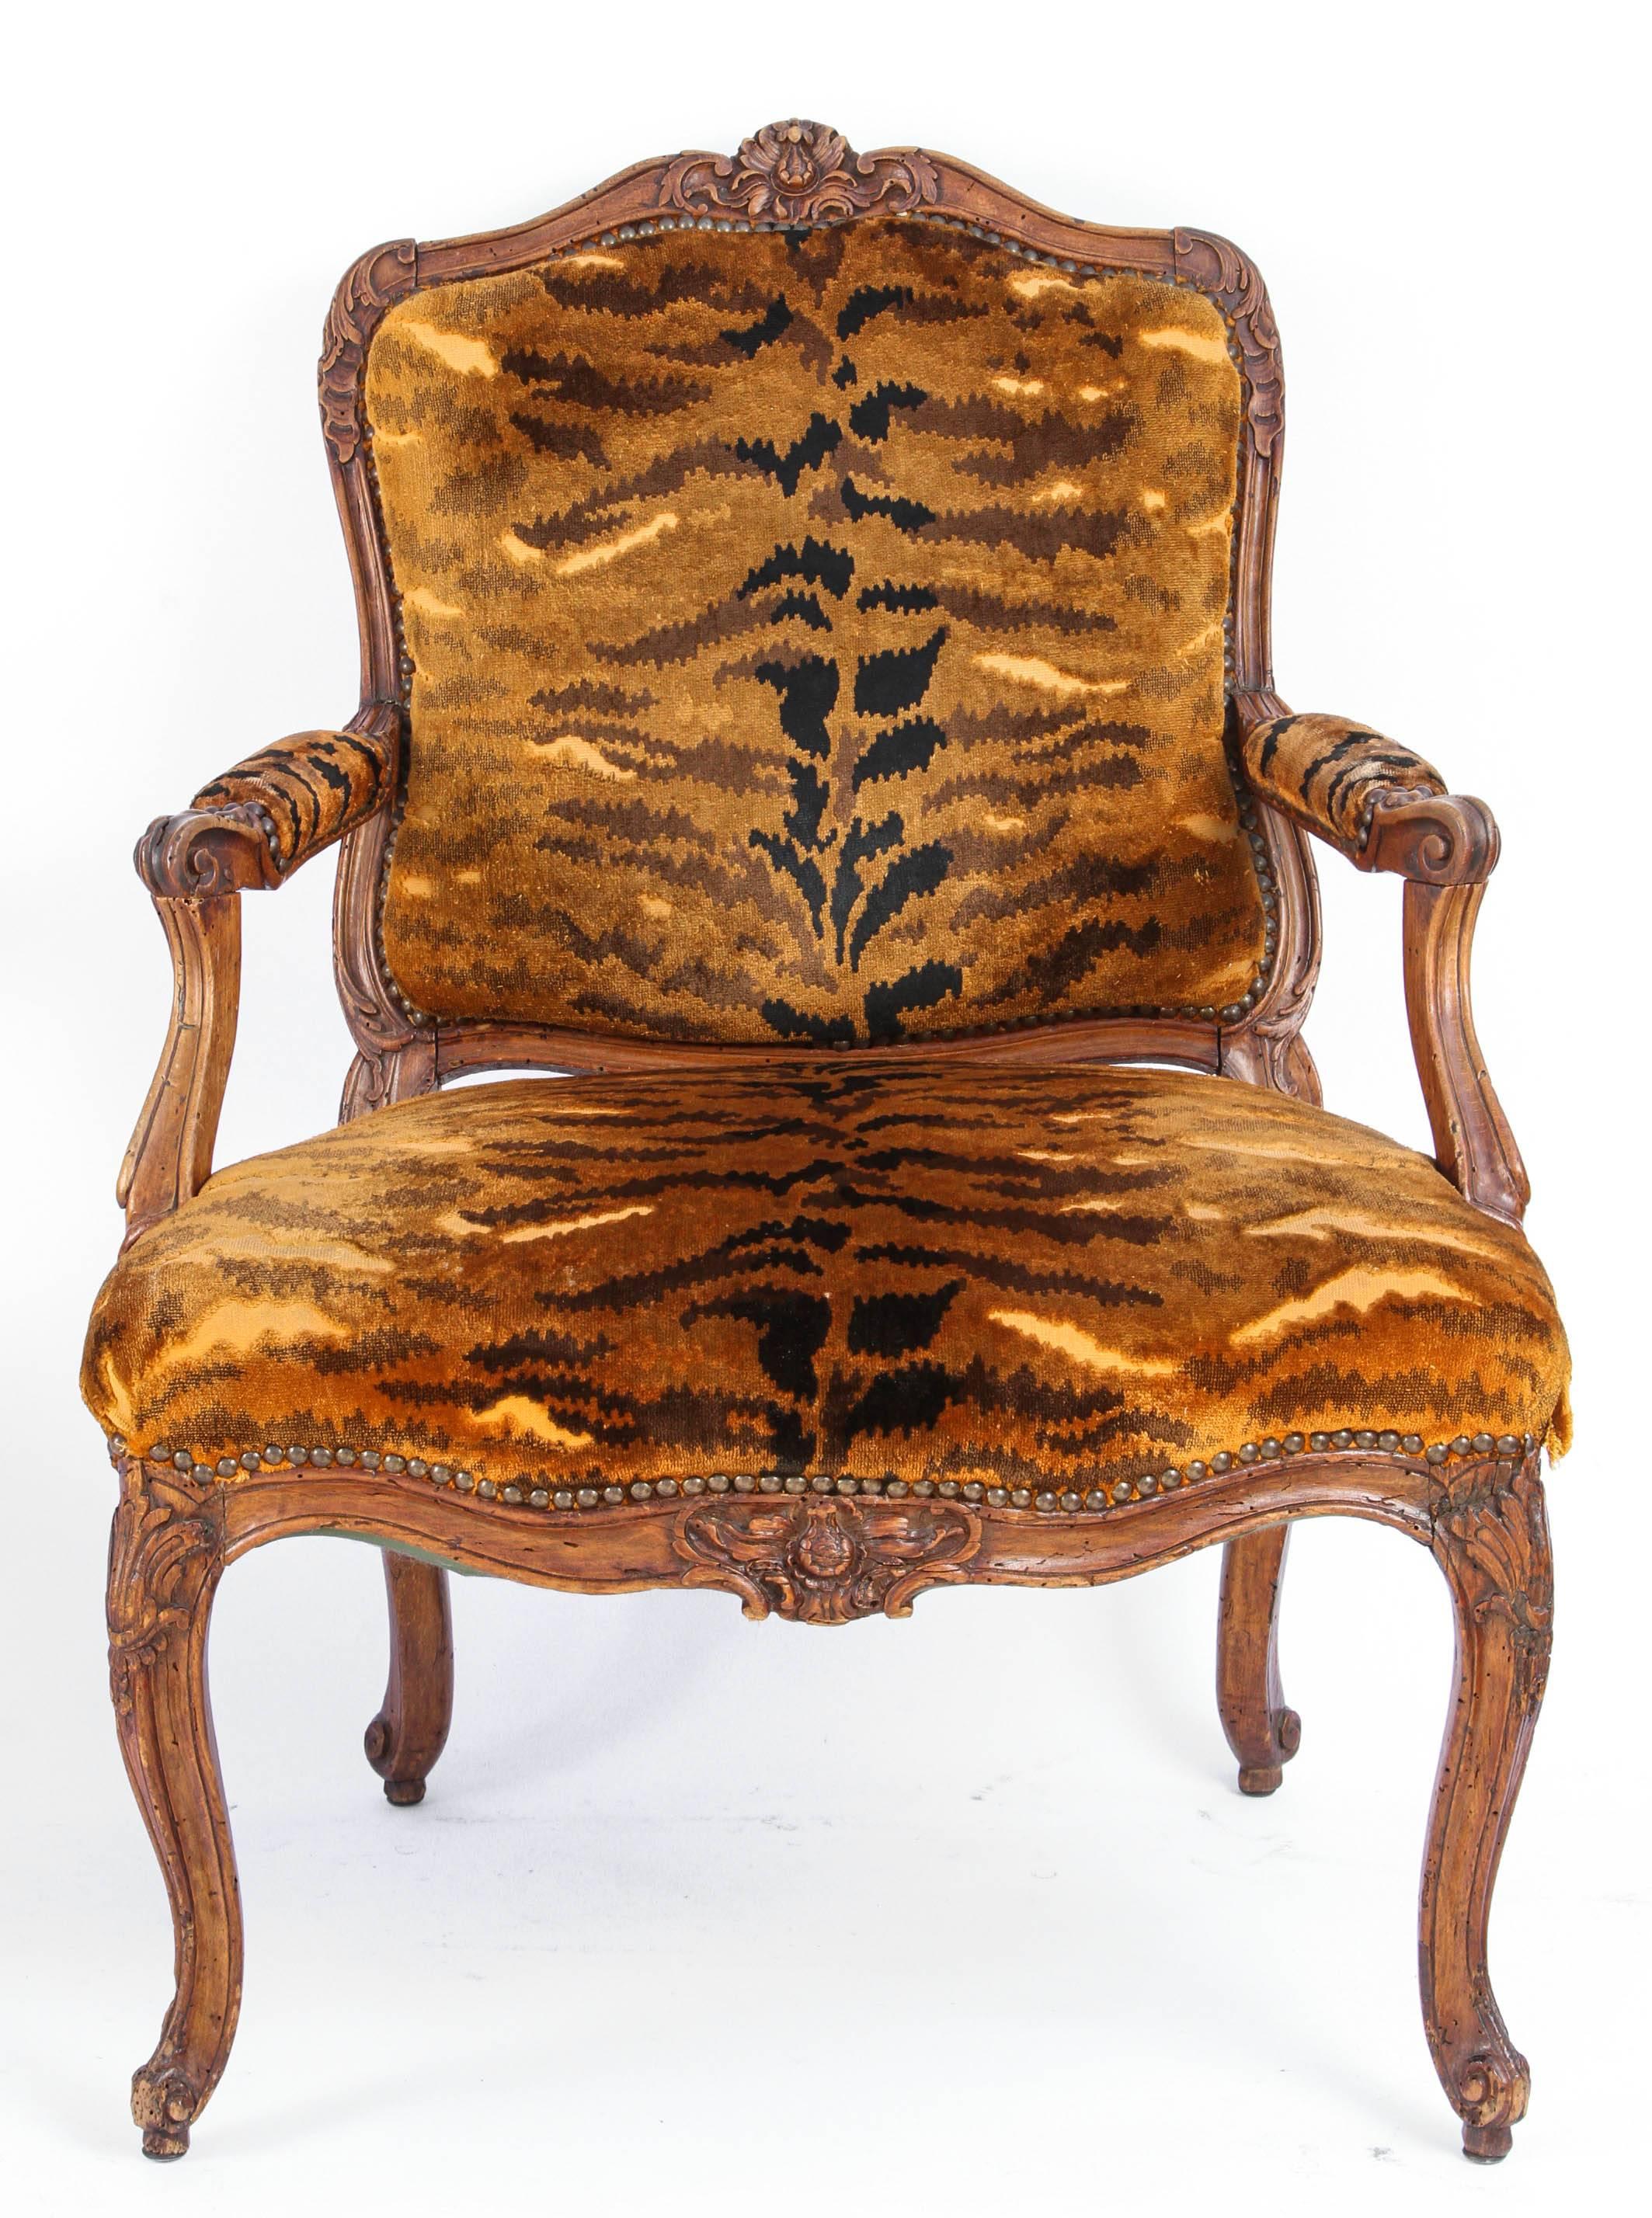 Similar Pair of 18th century French Regence carved walnut armchairs with silk velvet leopard print upholstery and nailhead detail. Each chair is slightly different in size.